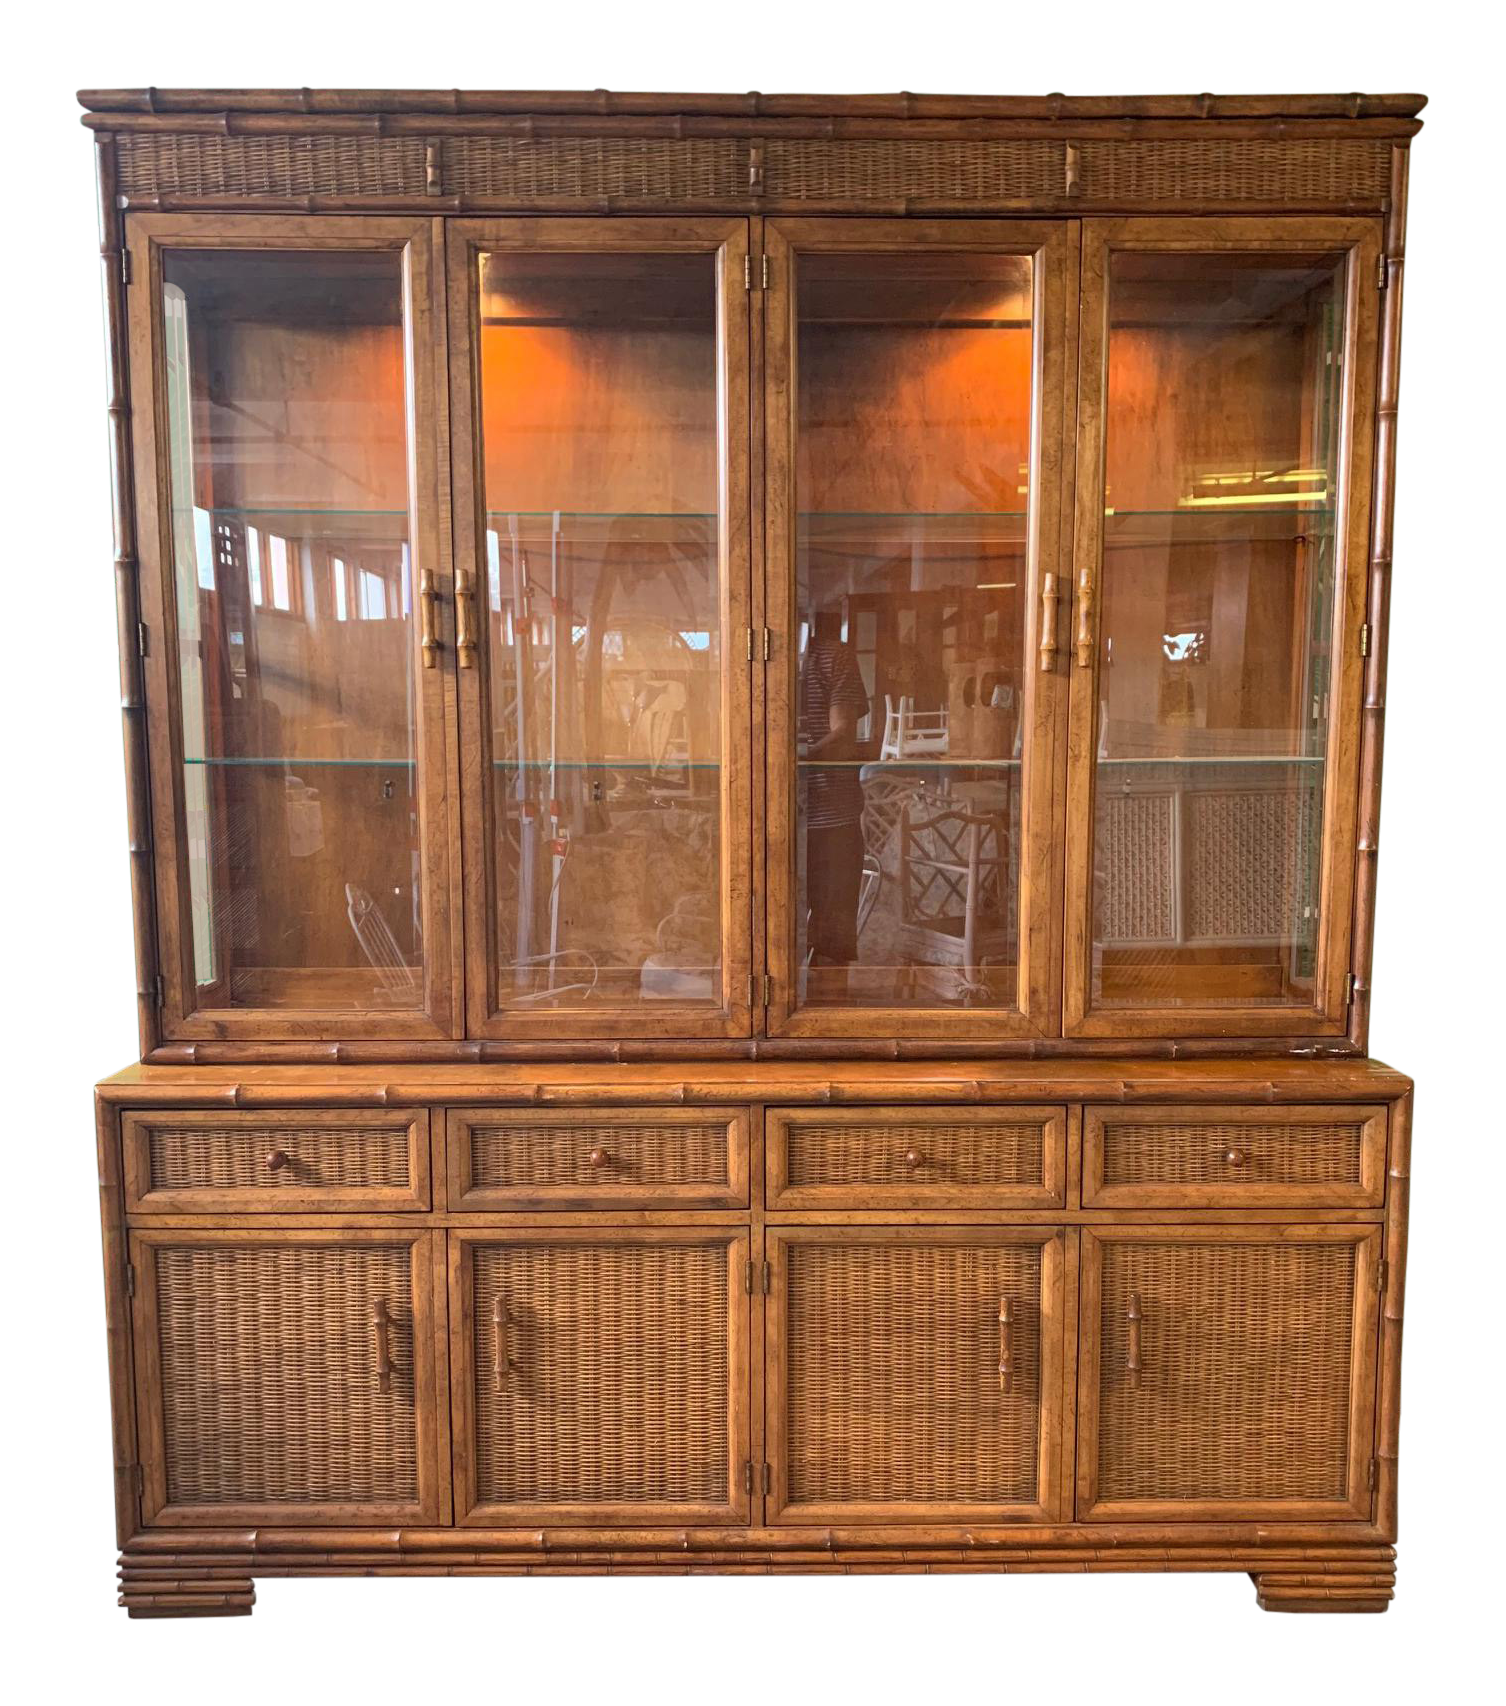 Faux Bamboo and Rattan China Cabinet by American of Martinsville